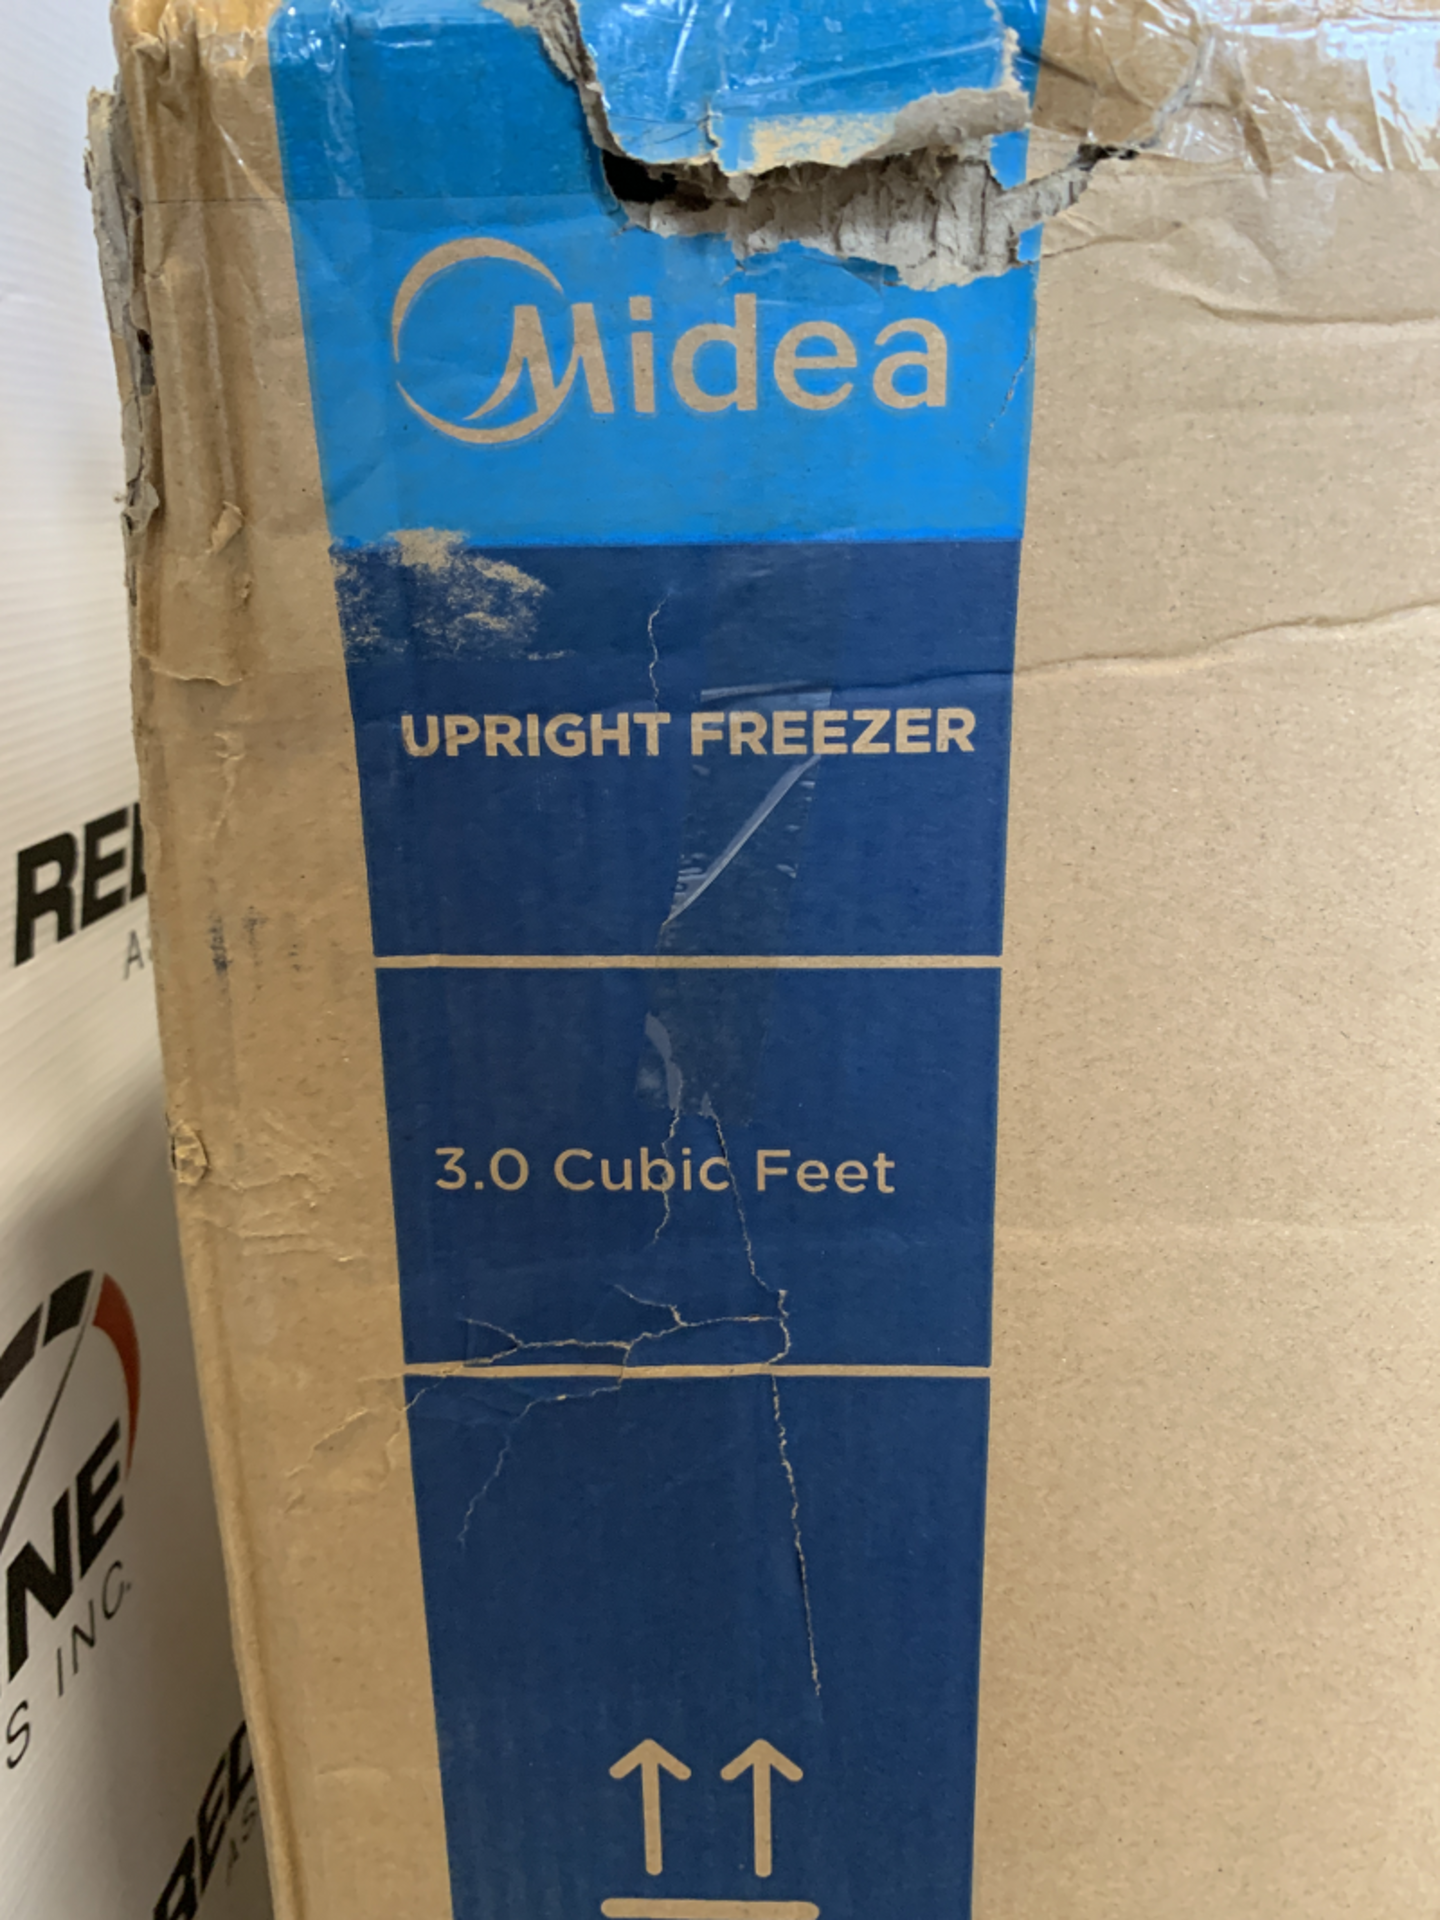 Midea - Size 3 cu. ft. - WHS-109FW1 Upright Freezer - QTY: 1 - Approx. MSRP $285.00 CAD - Image 2 of 2